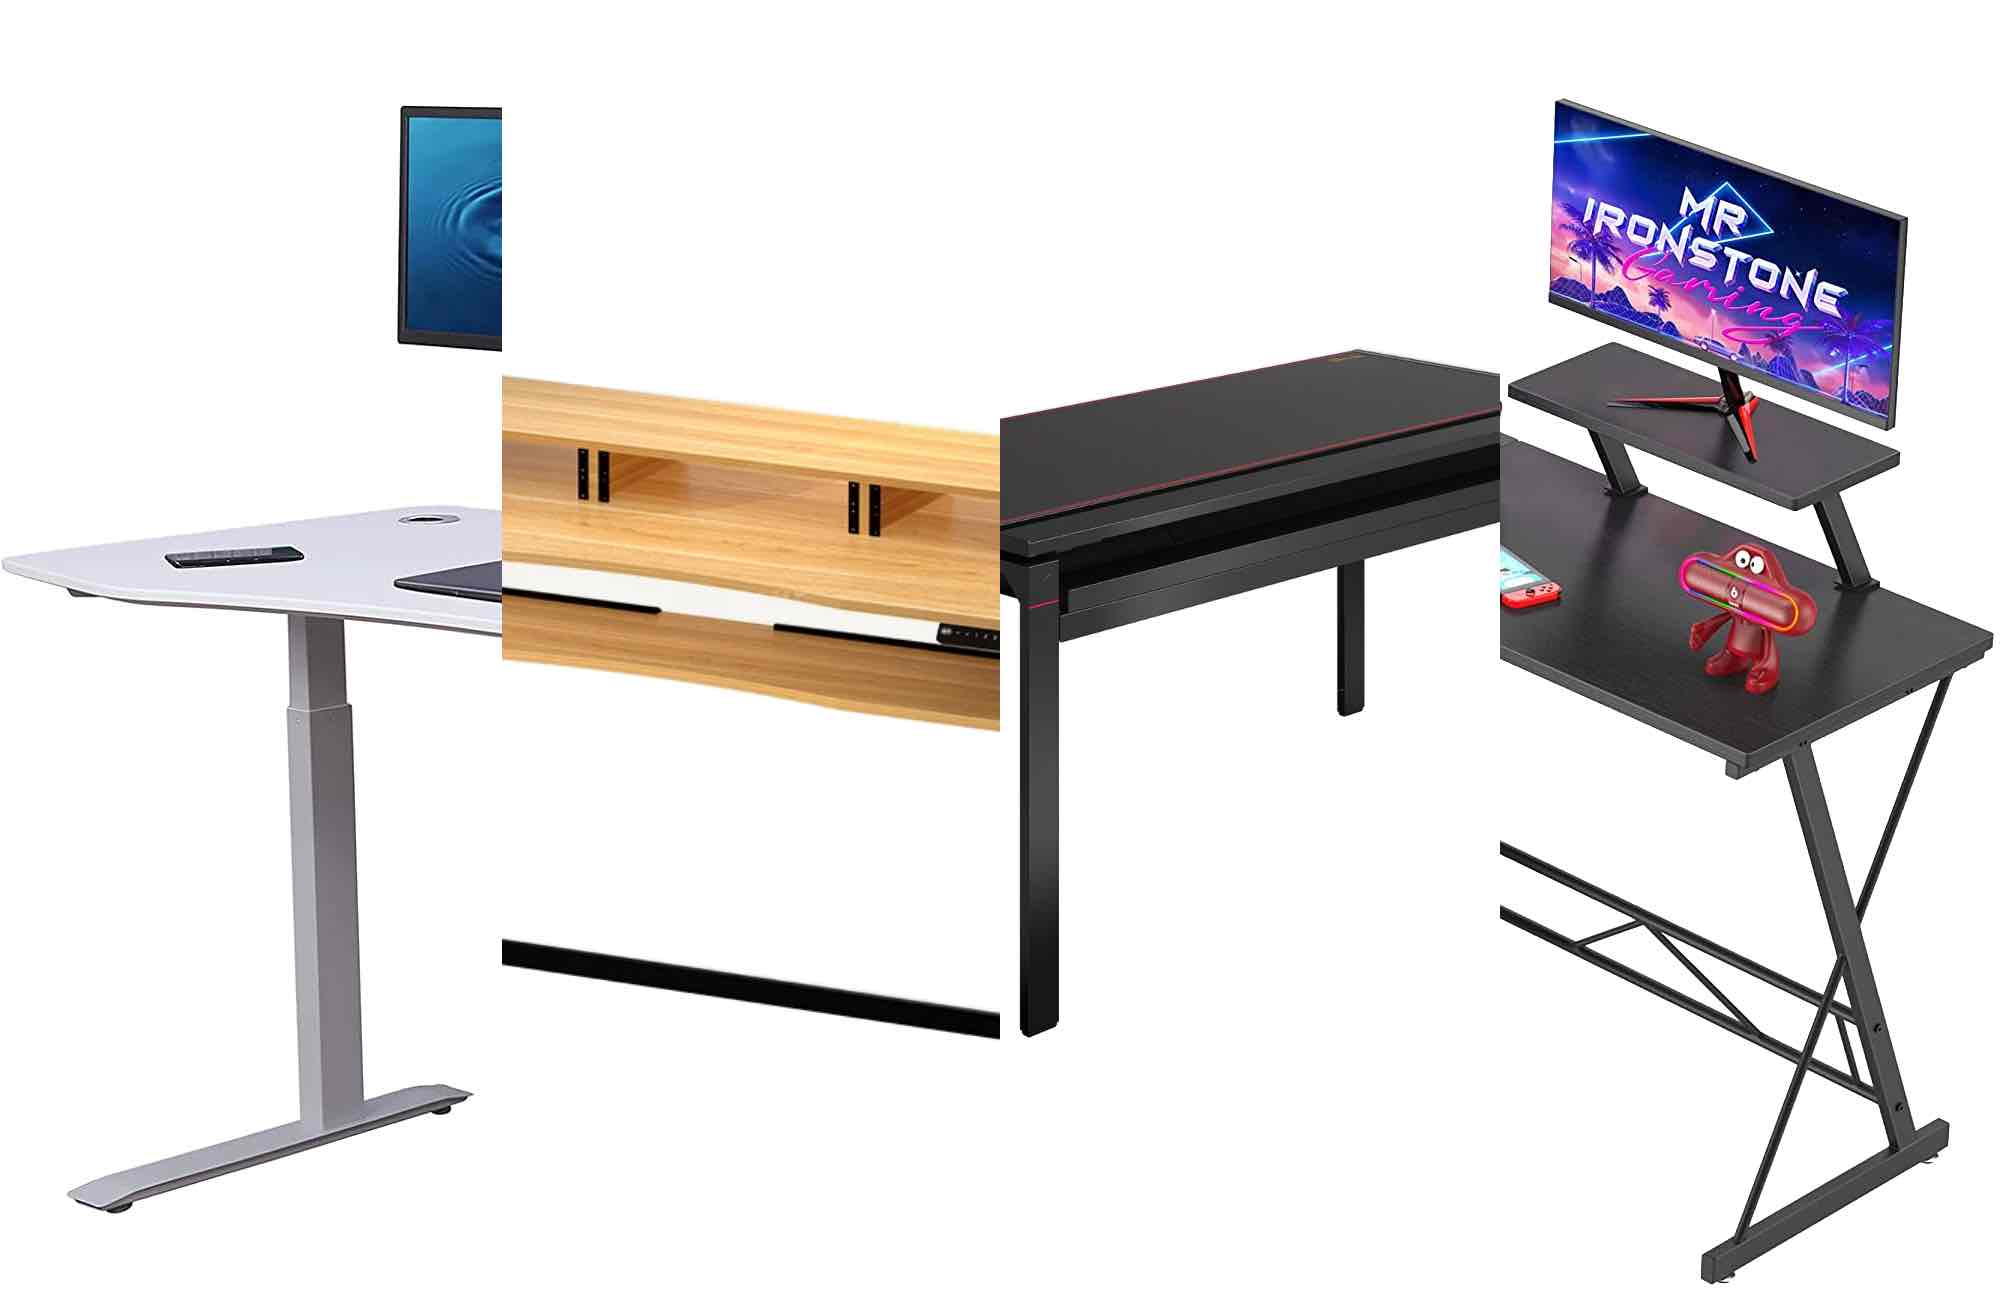 The best desks for dual monitors in 2023